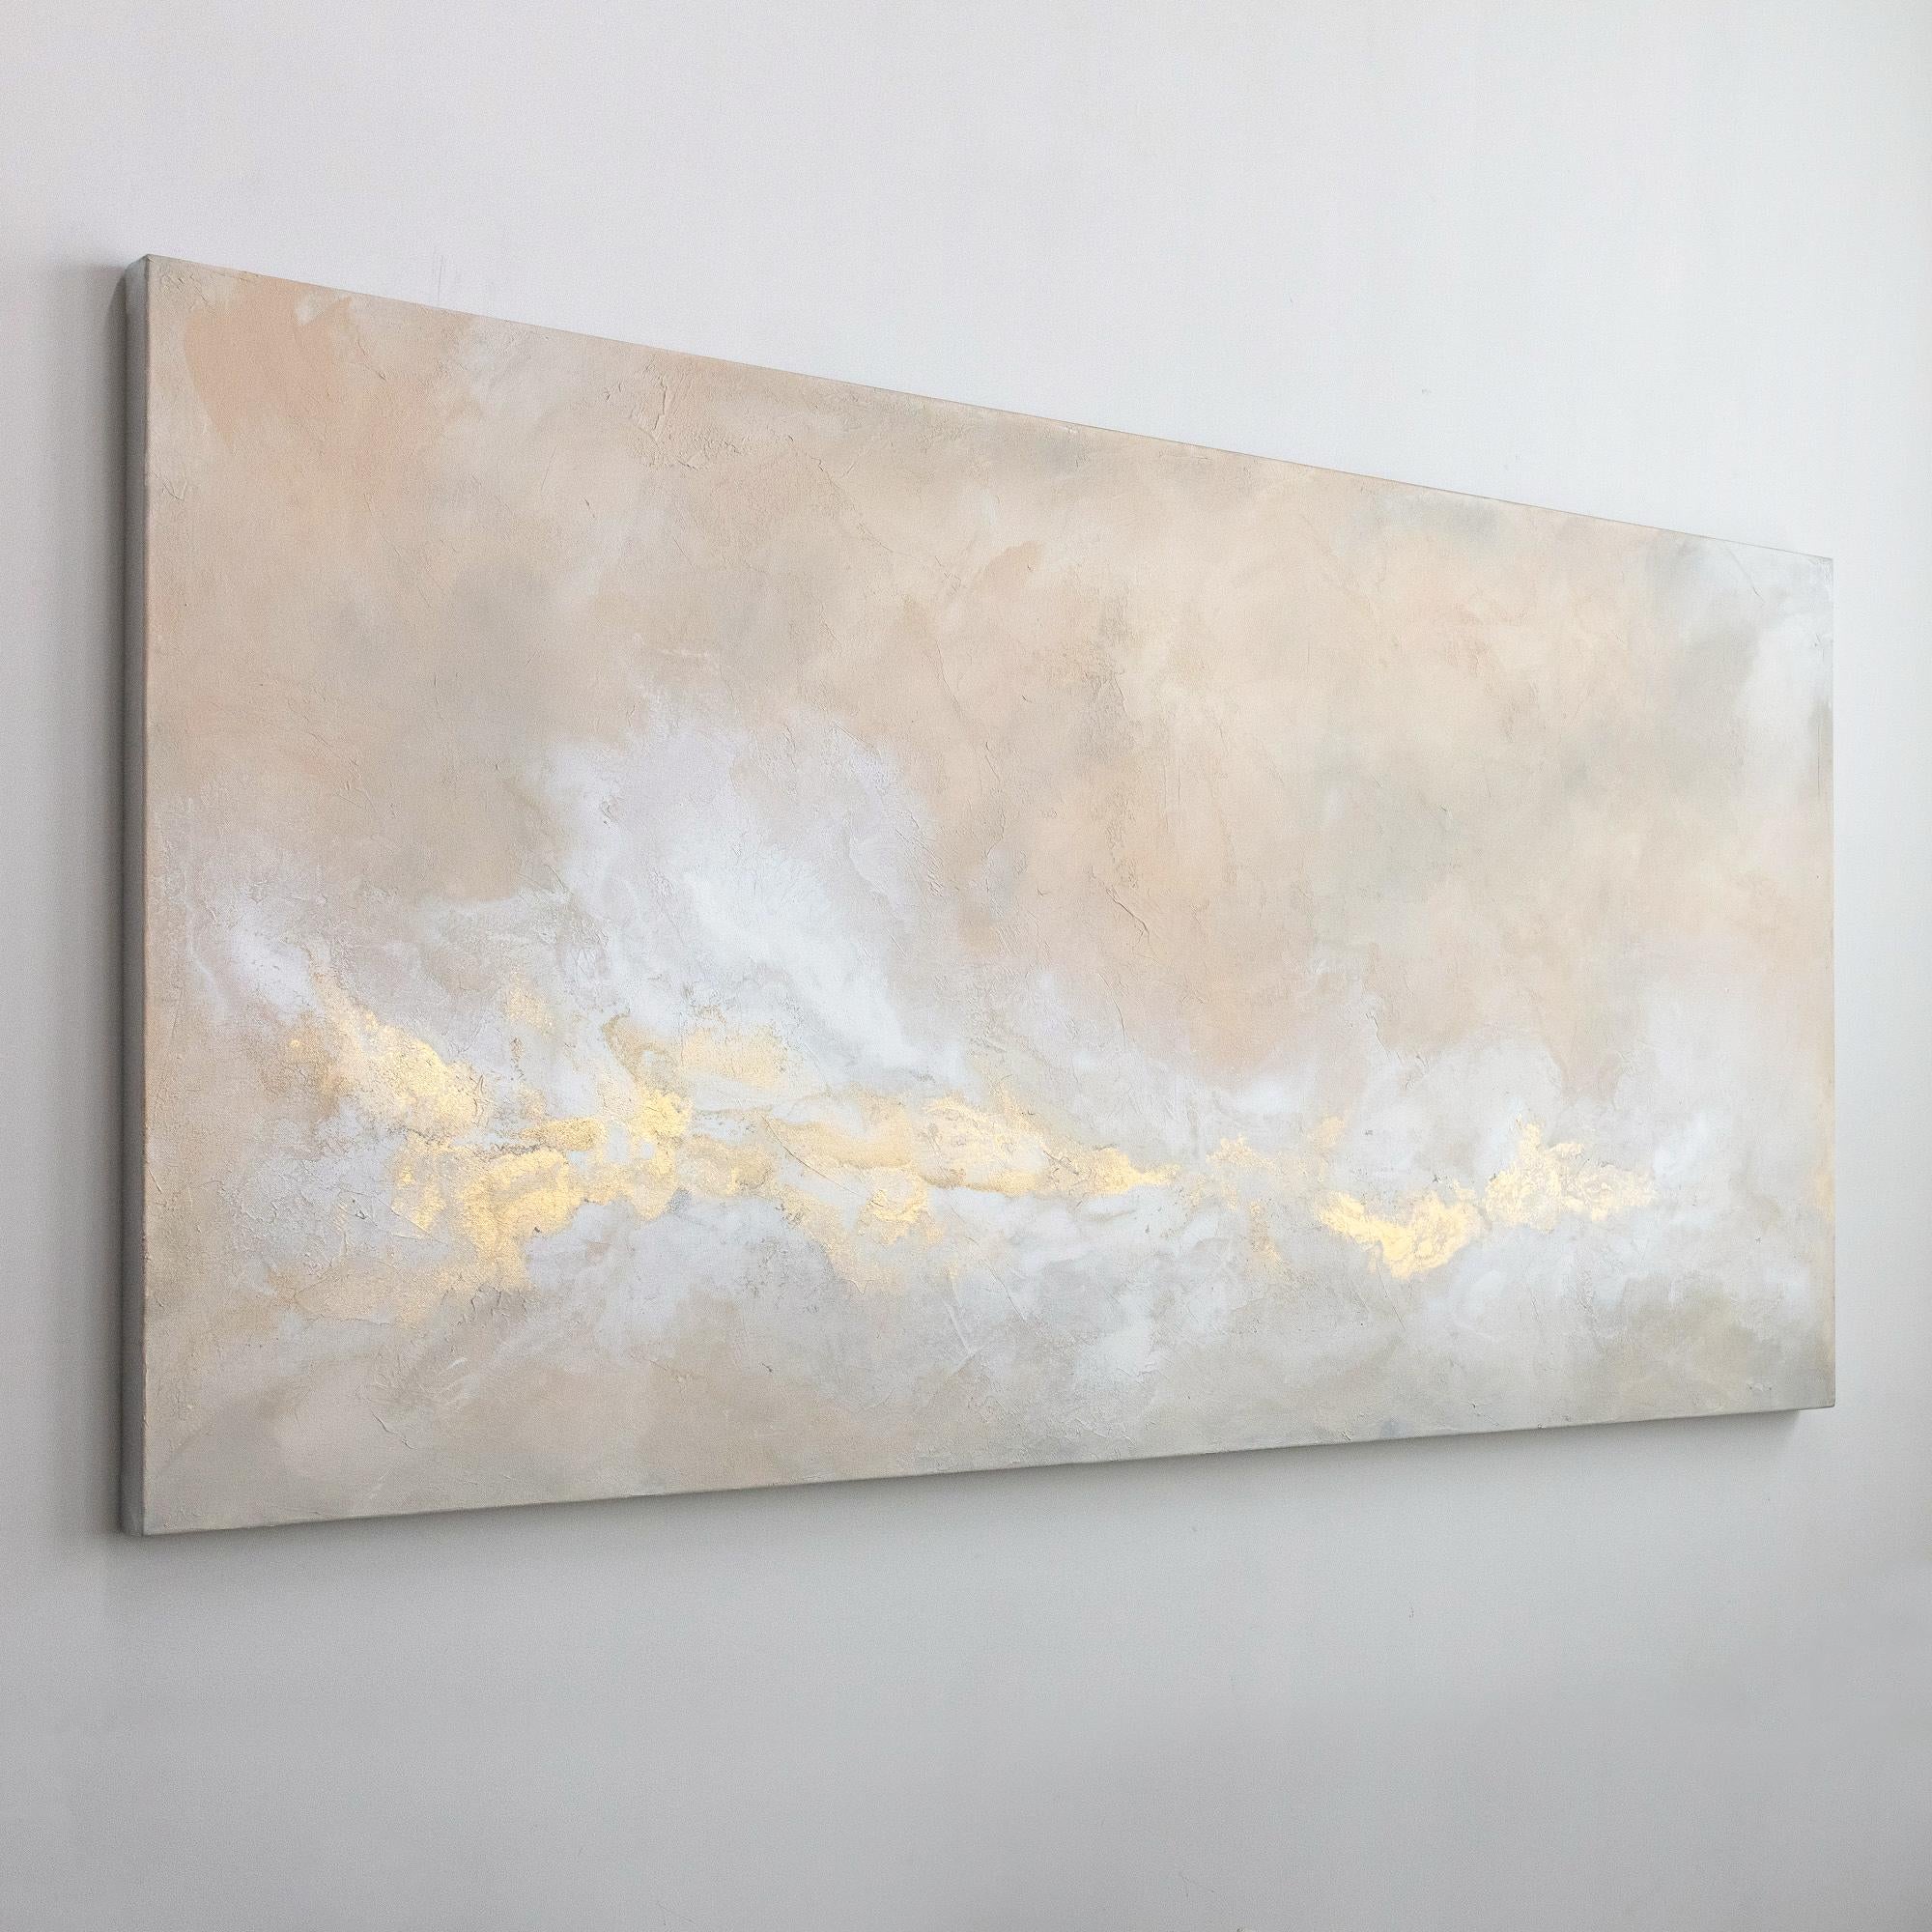 This large abstract statement painting by Julia Contacessi is made with mixed media on canvas. It features a light, balanced composition and a warm neutral palette with blush tones, white, and metallic gold accents. The sides of the painting are